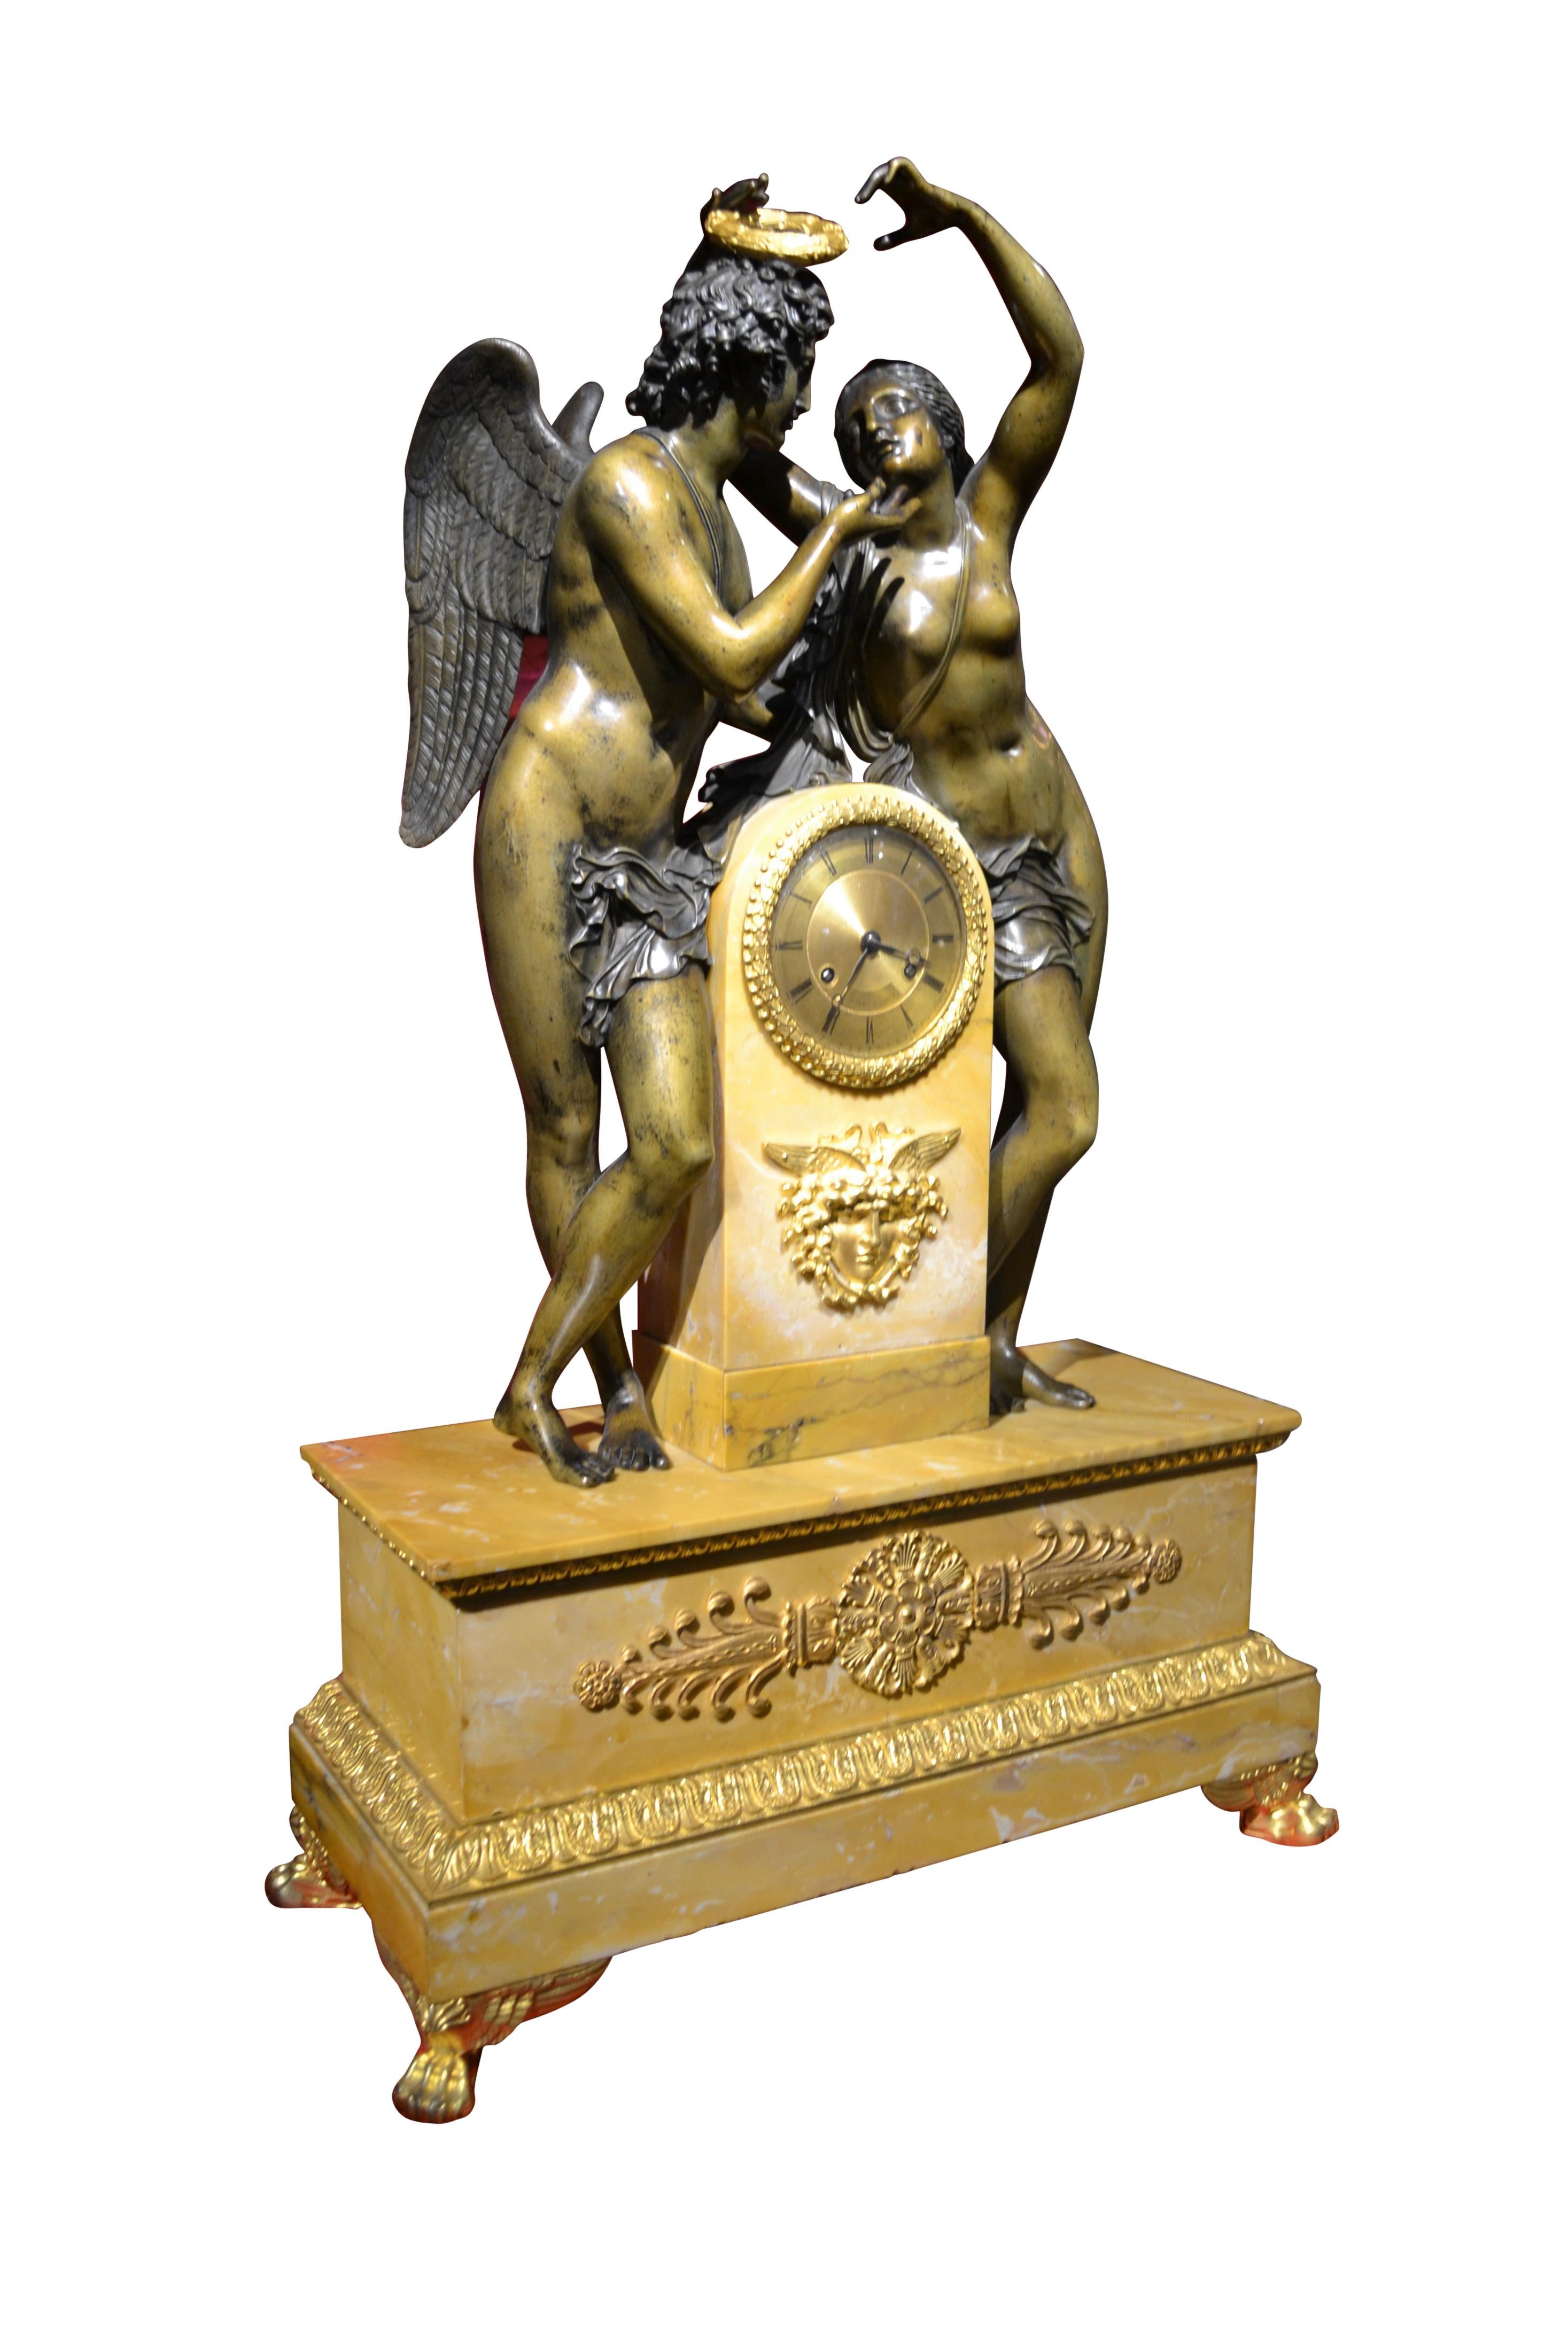 A large scale French Empire figurative allegorical clock showing “Psyche Crowning Amor”. Psyche stands to the right of the domed clock plinth, holding her hands aloft with a gilded wreath, (not shown), Amor stands to the left. The stepped yellow